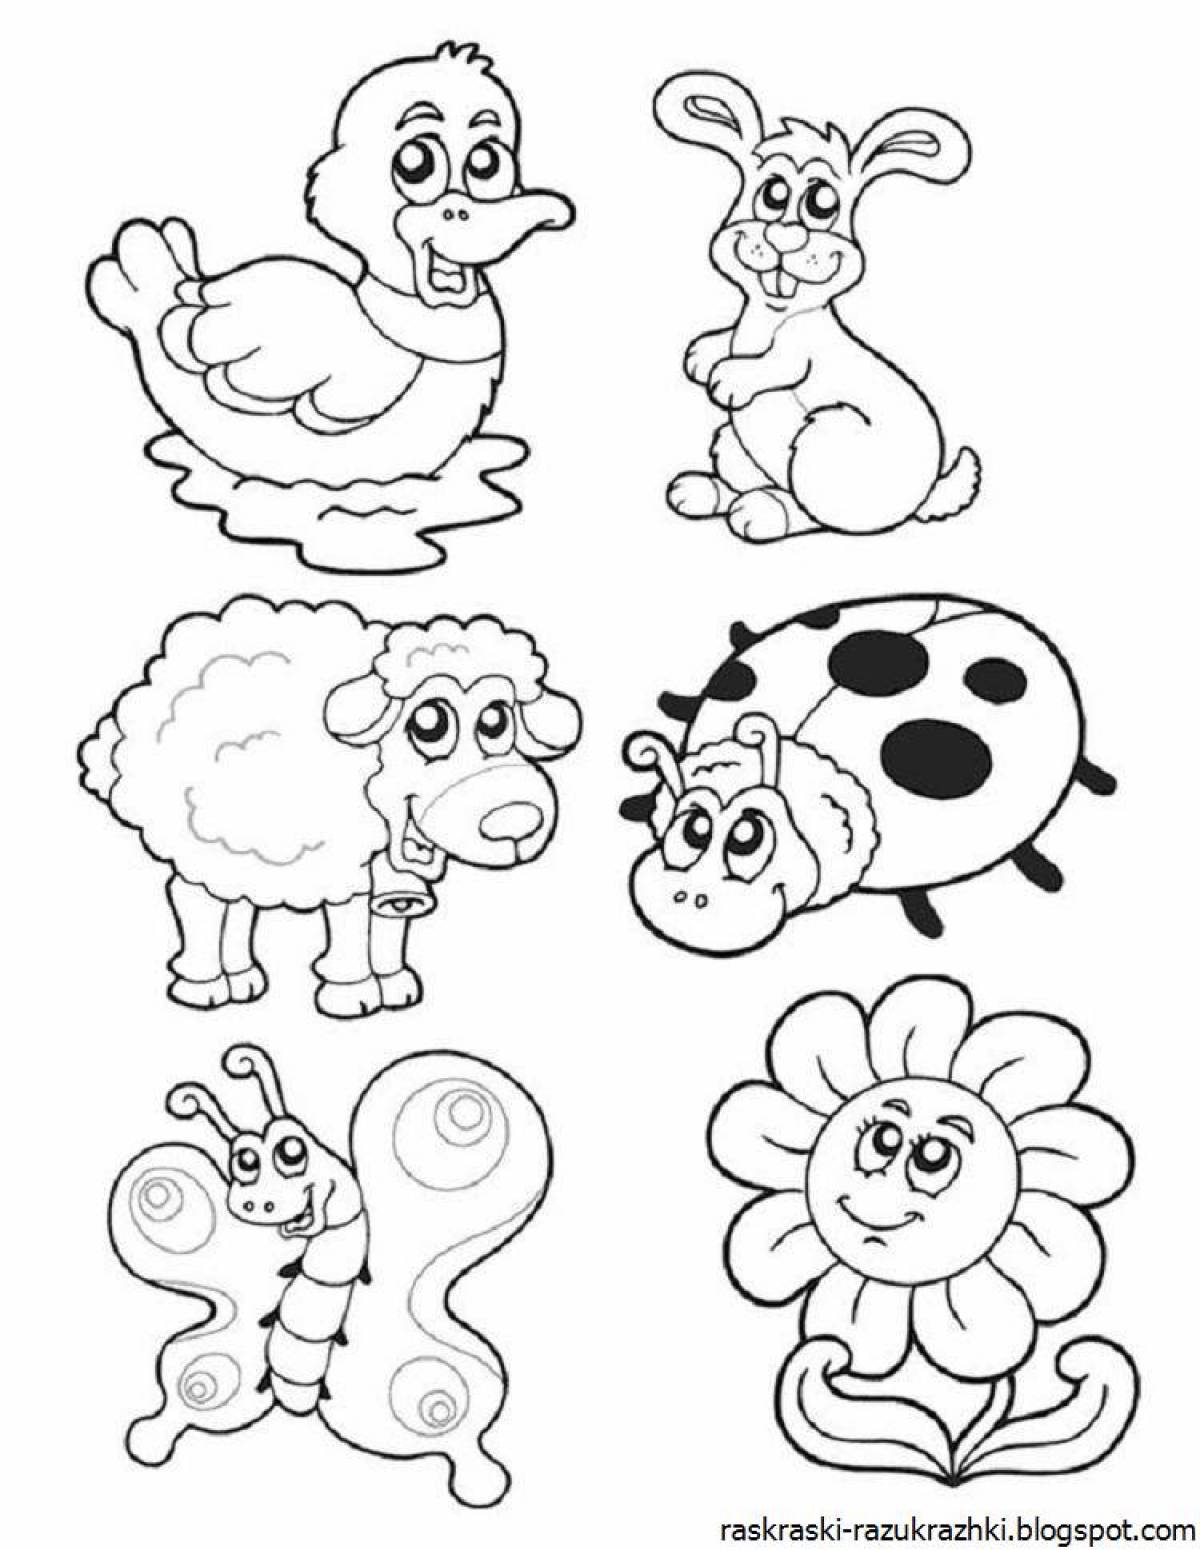 Attractive animal coloring pages